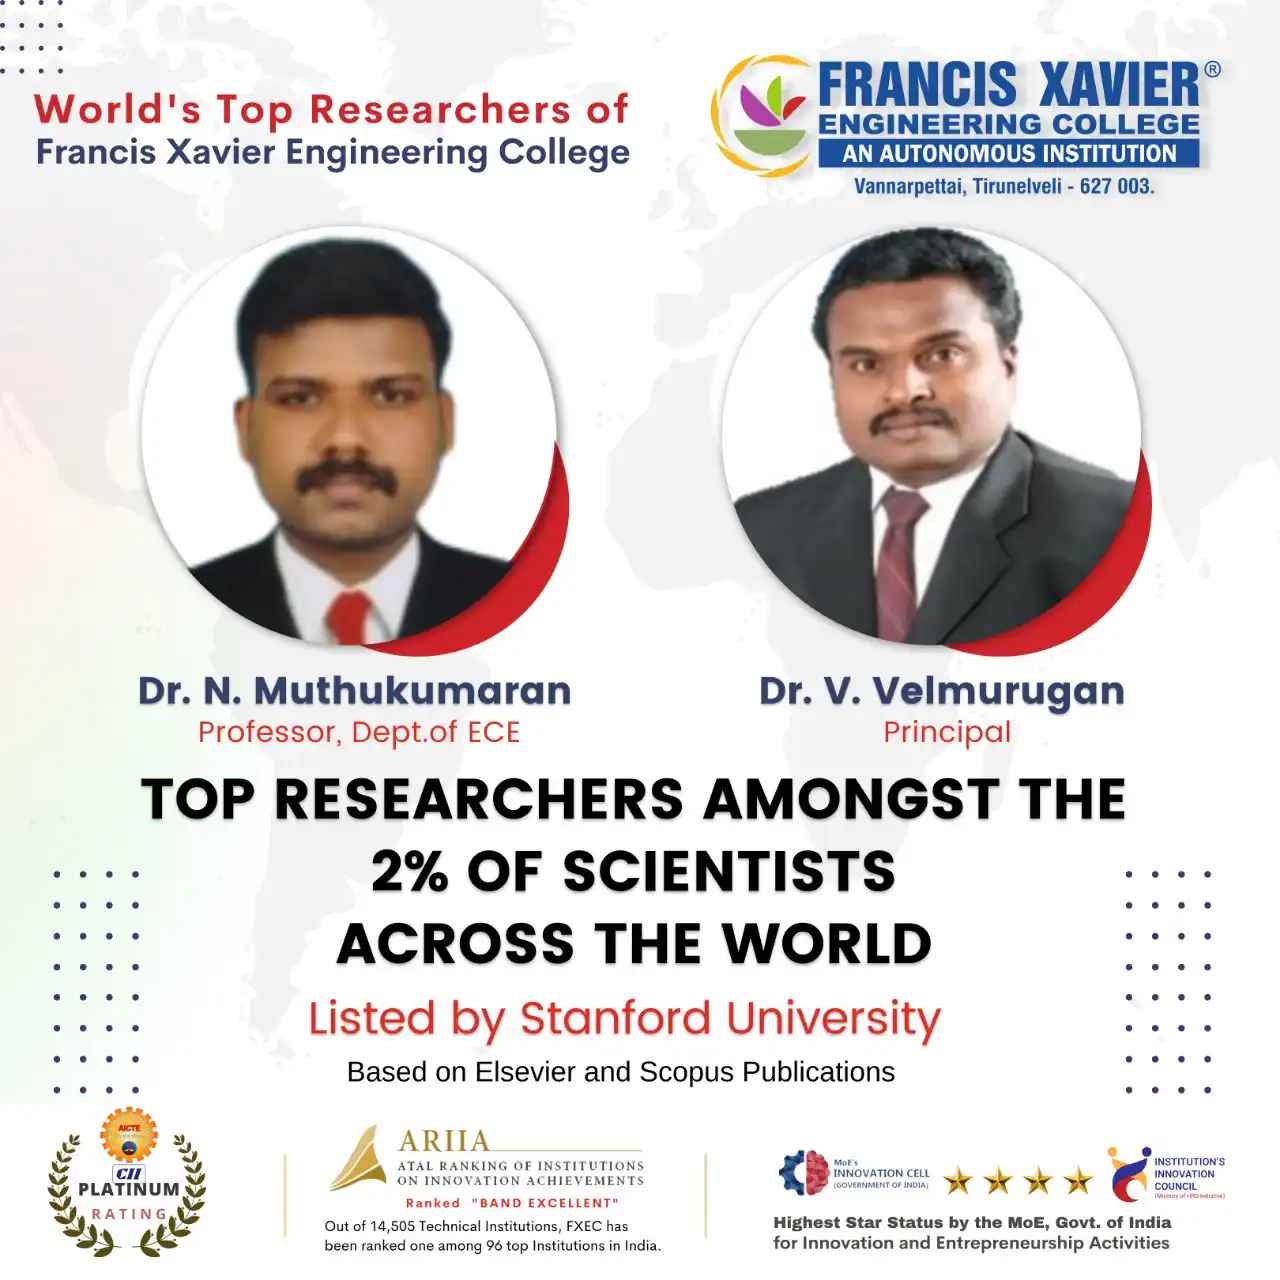 Worlds Top Researchers of Francis Xavier Engineering College